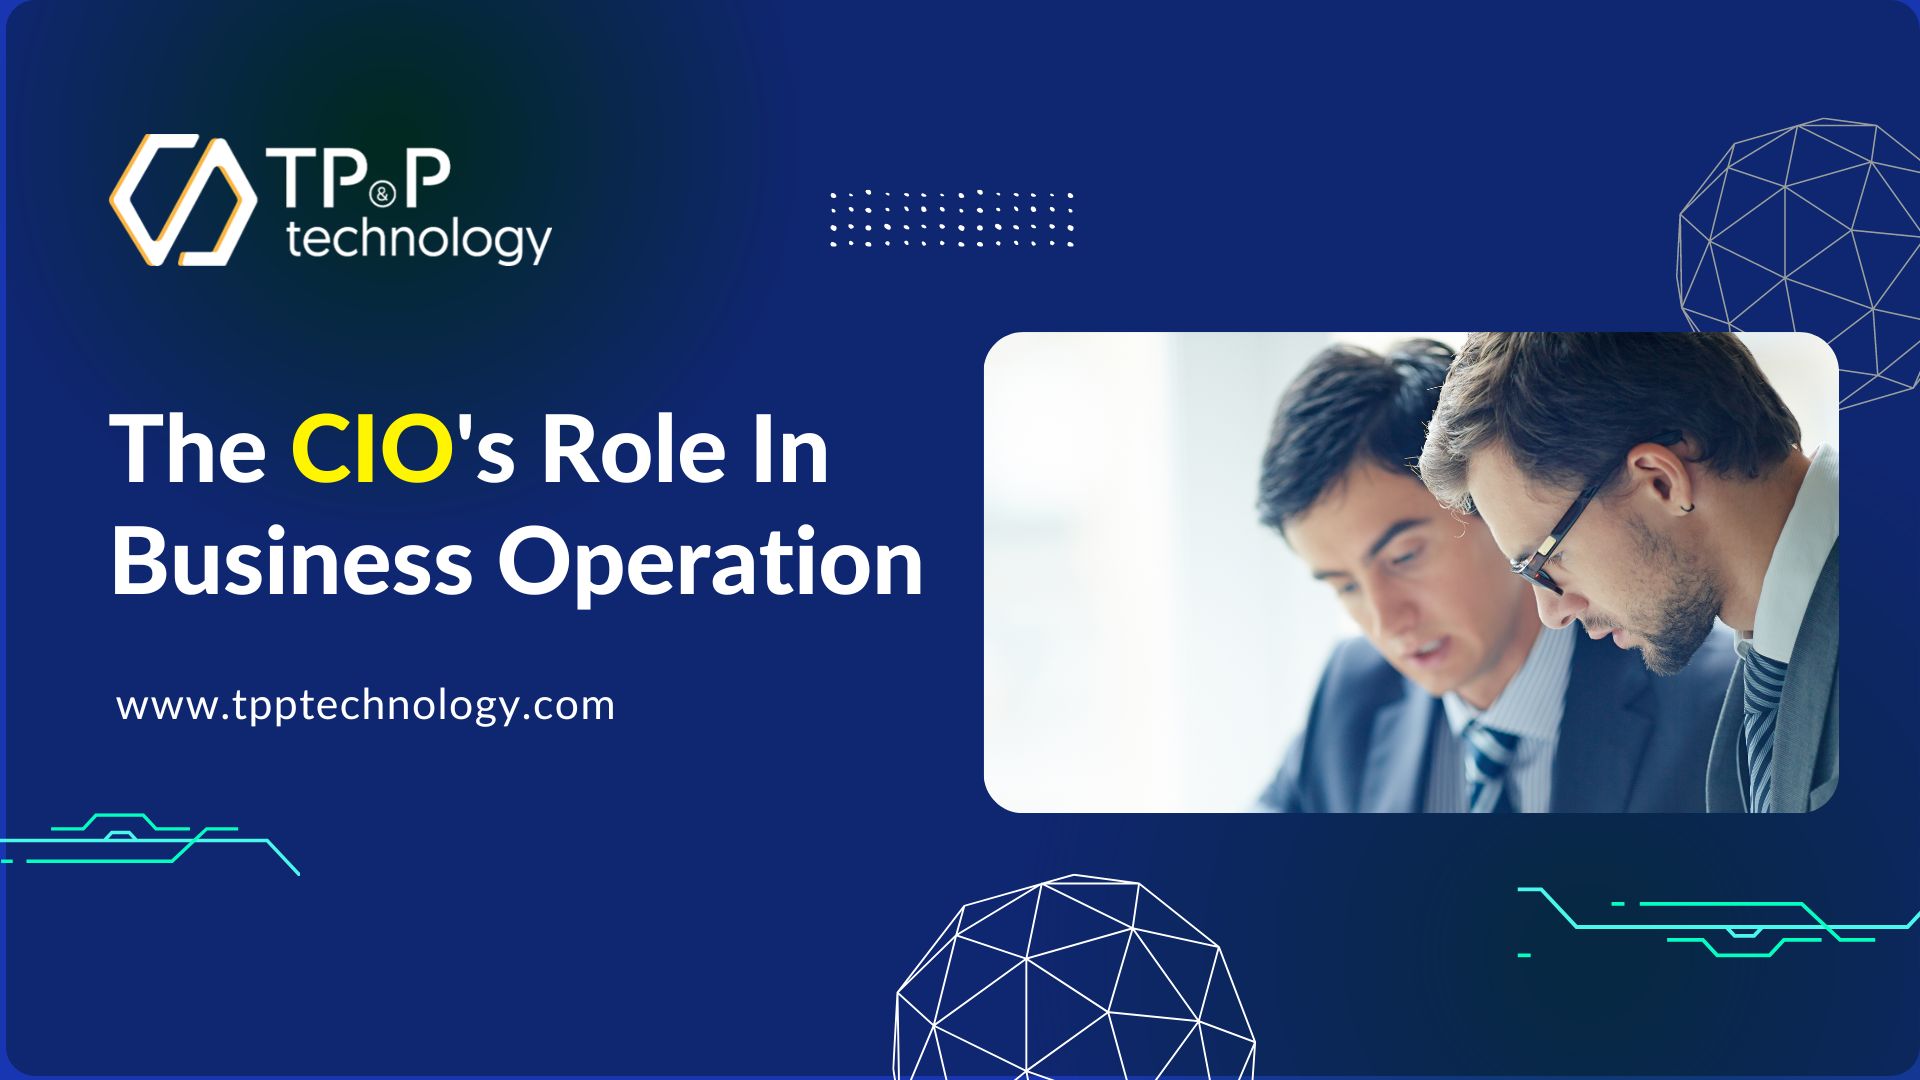 The CIO's Role In Business Operation